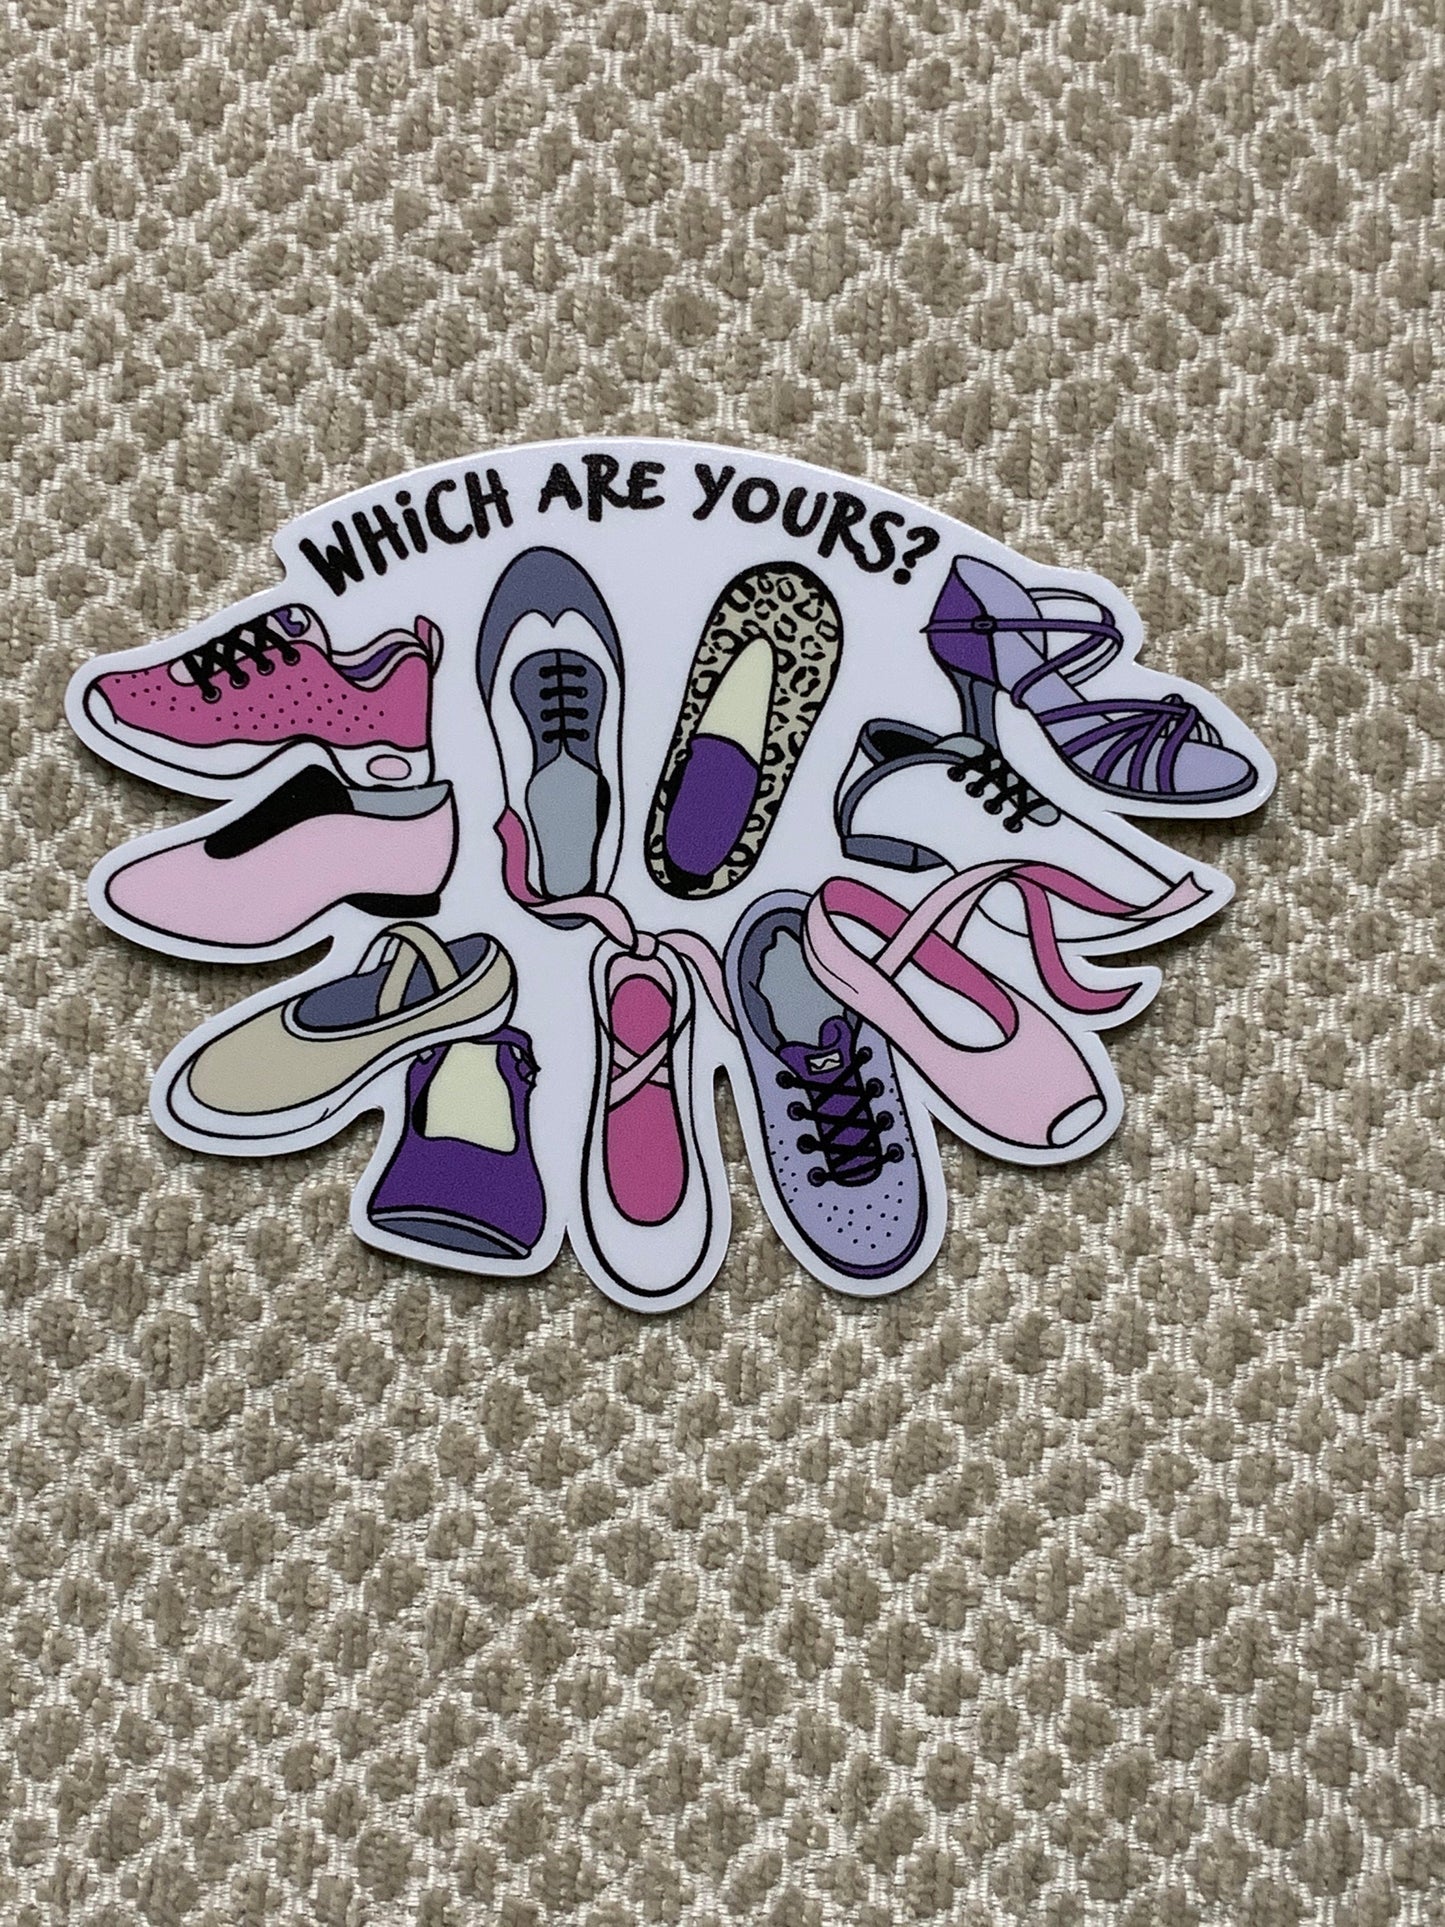 Which Are Yours Dance Shoes Vinyl Sticker, Vinyl Decal, Laptop Sticker, Dance Sticker, Gifts For Dancers,